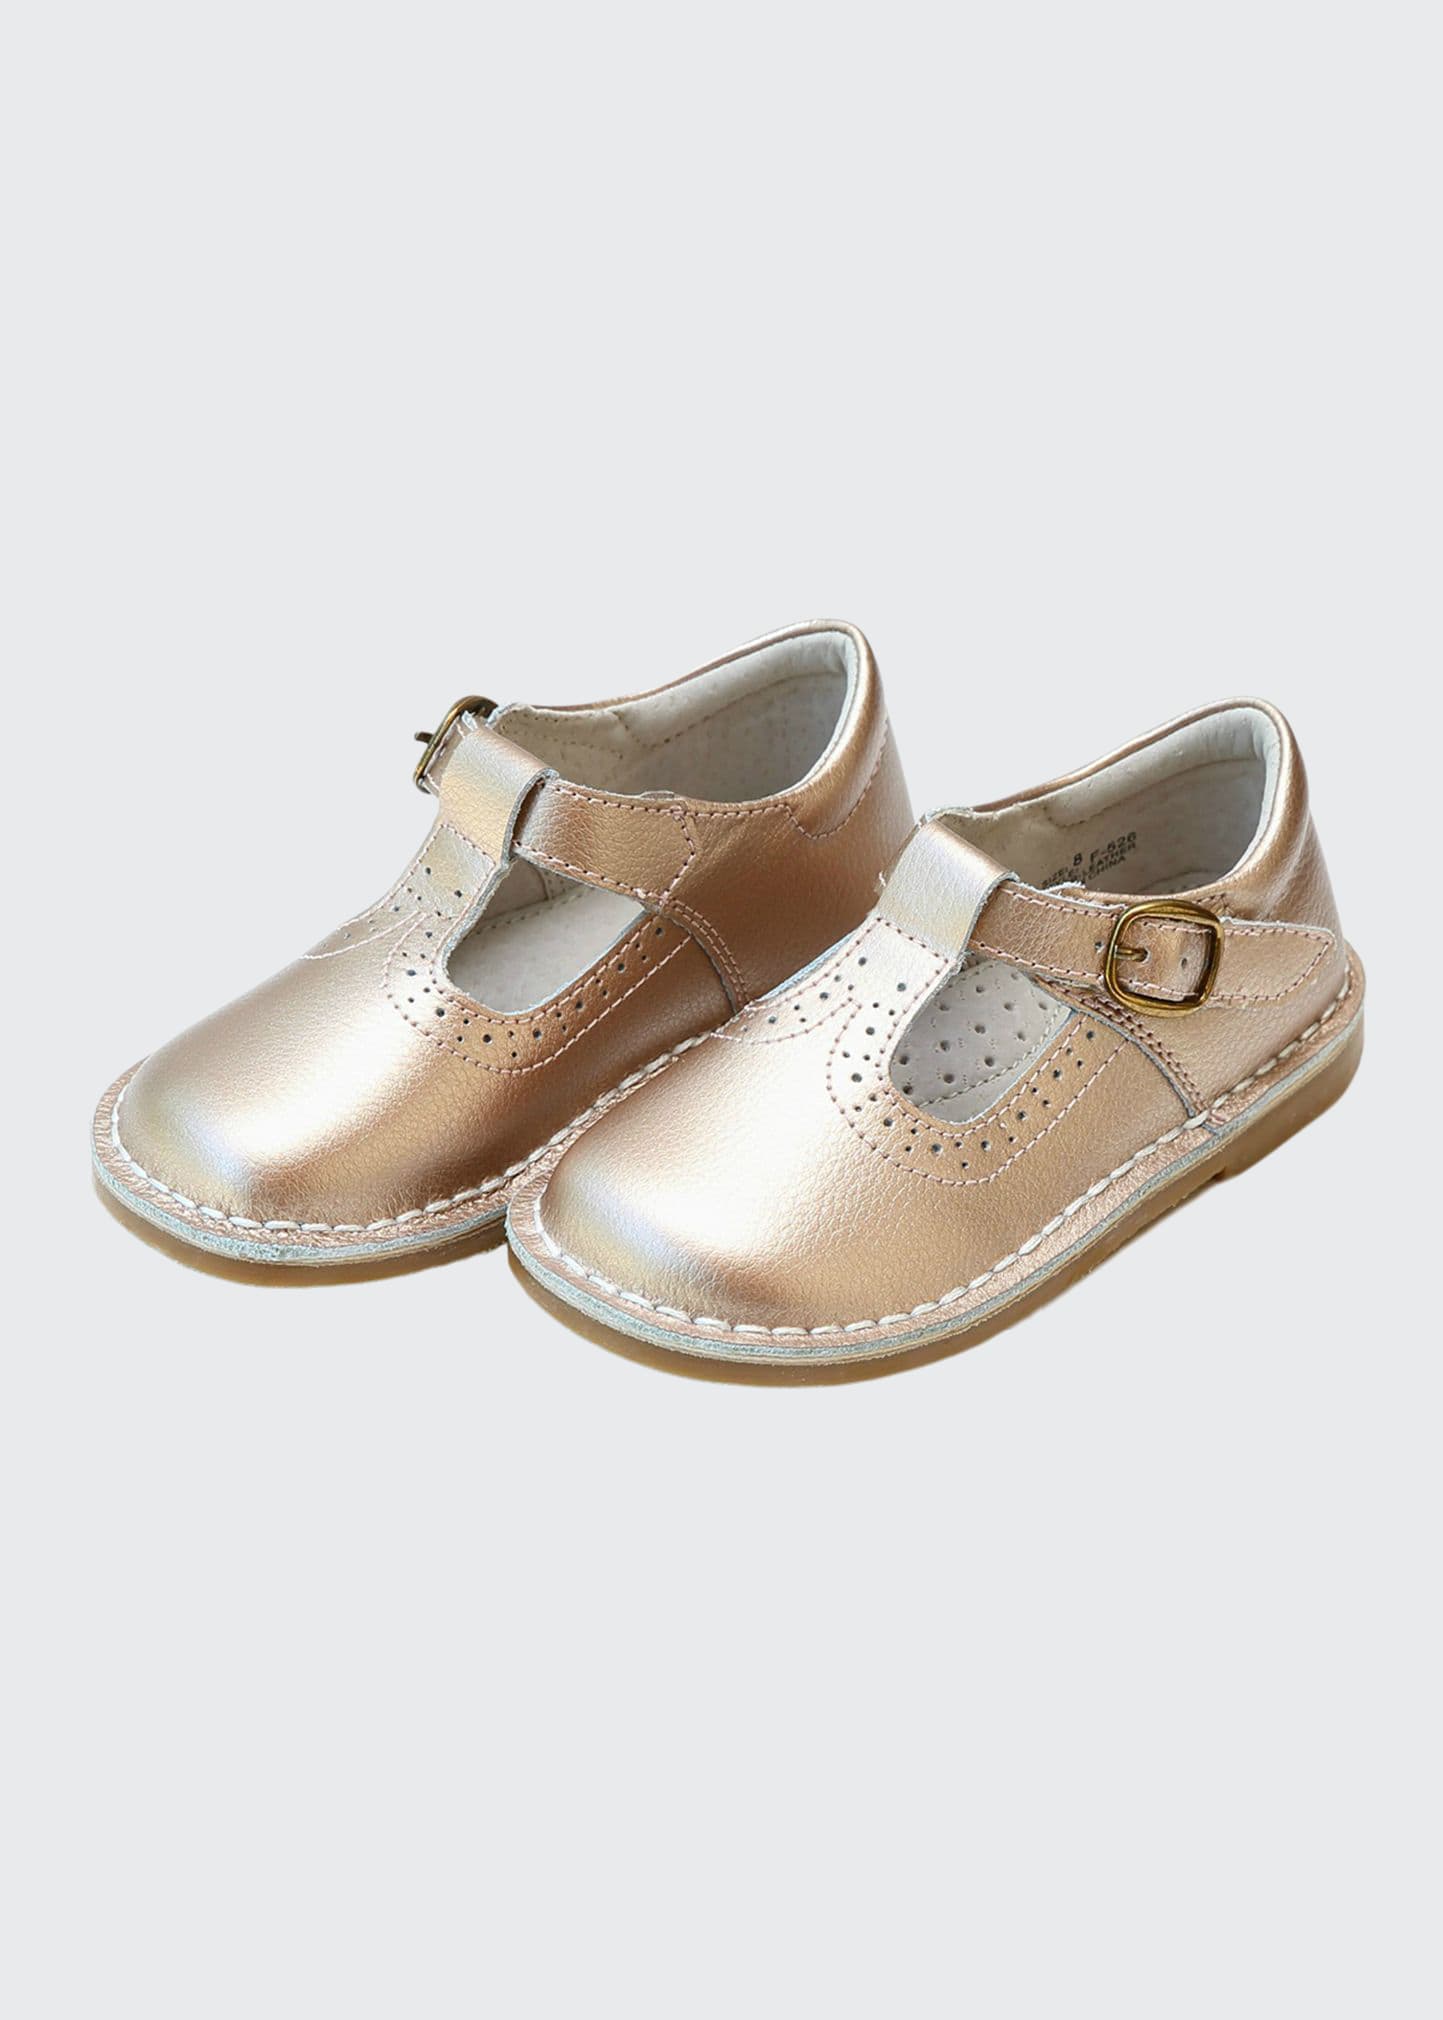 L'amour Shoes Kids' Girl's Frances Metallic T-strap Mary Jane Shoes, Baby/toddlers